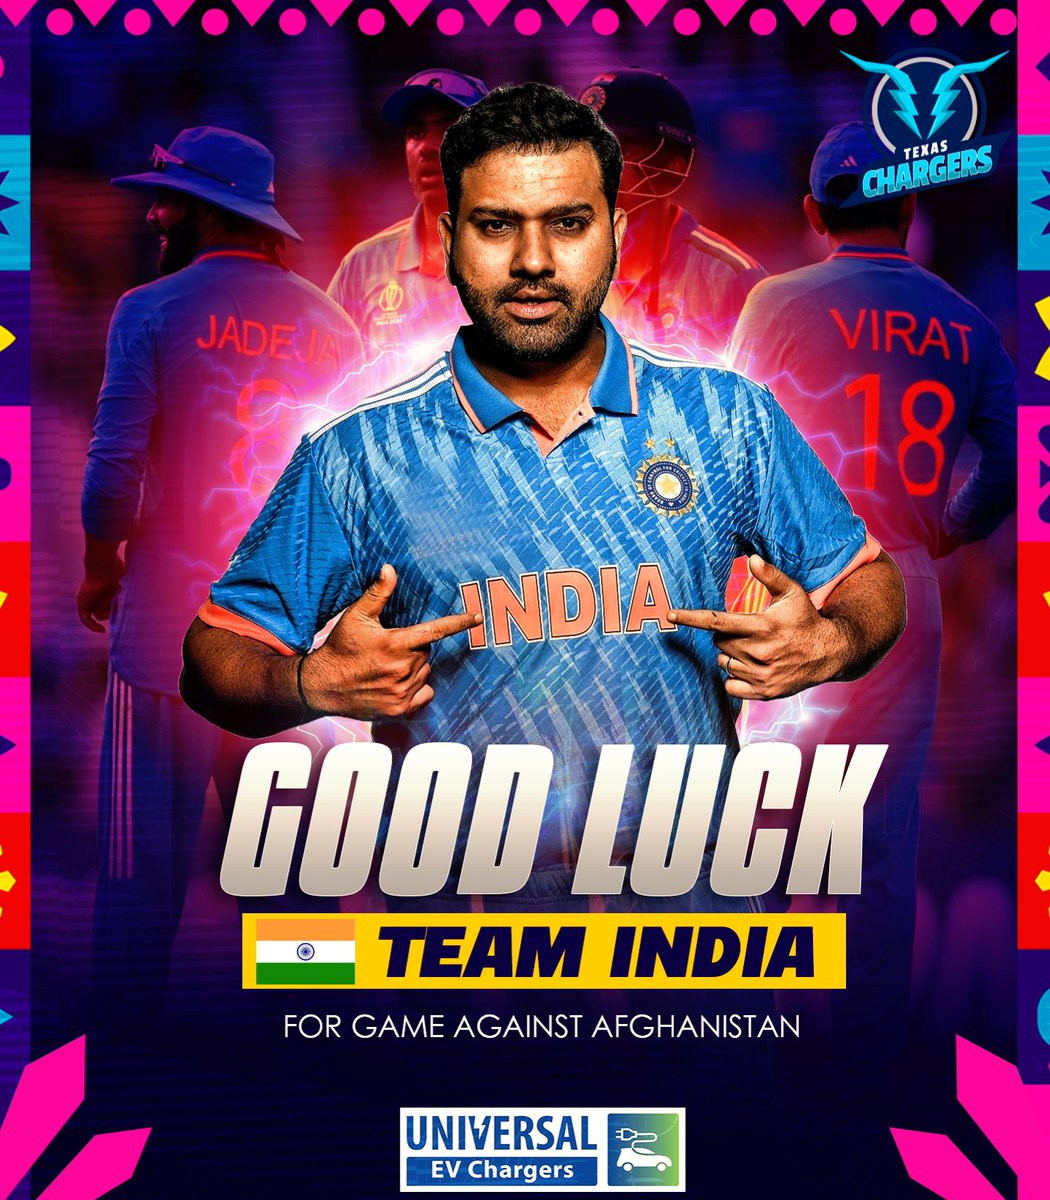 From one blue army to another 💙 Team India, shine bright on the field 🏏 #TexasChargers #CricketWorldCup #USACricket #IndiaCricket #ChargingToVictory